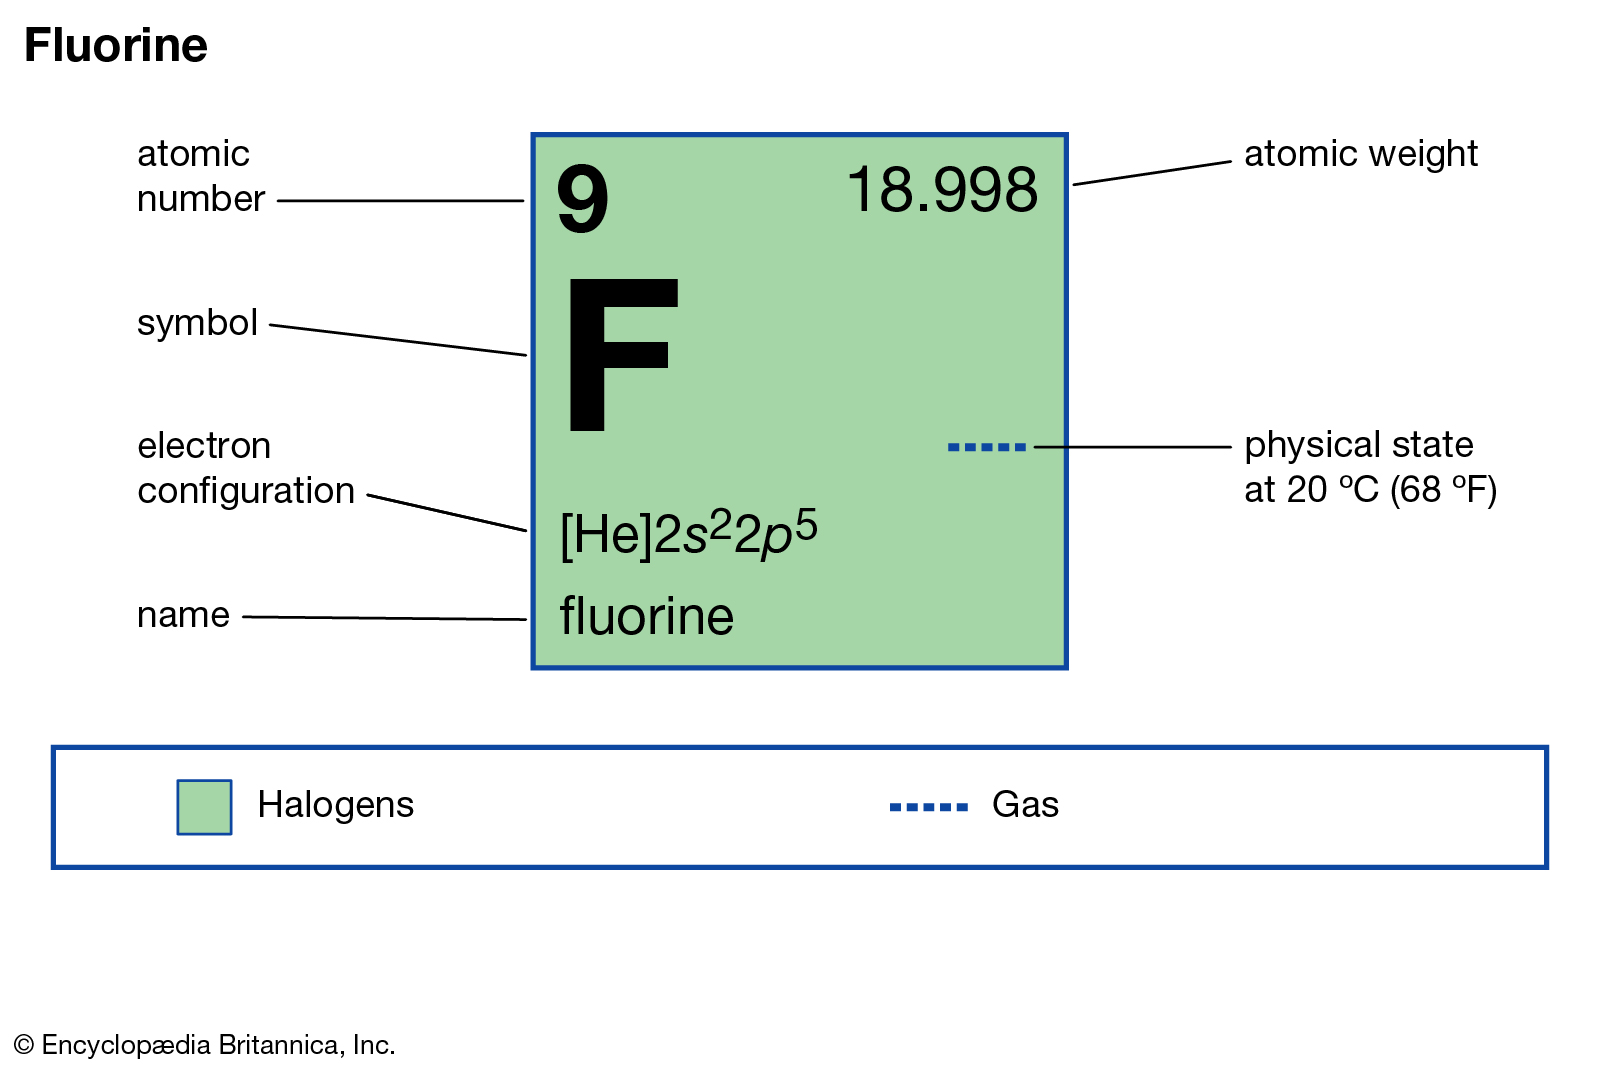 hinh-anh-interesting-facts-about-fluorine-40-0